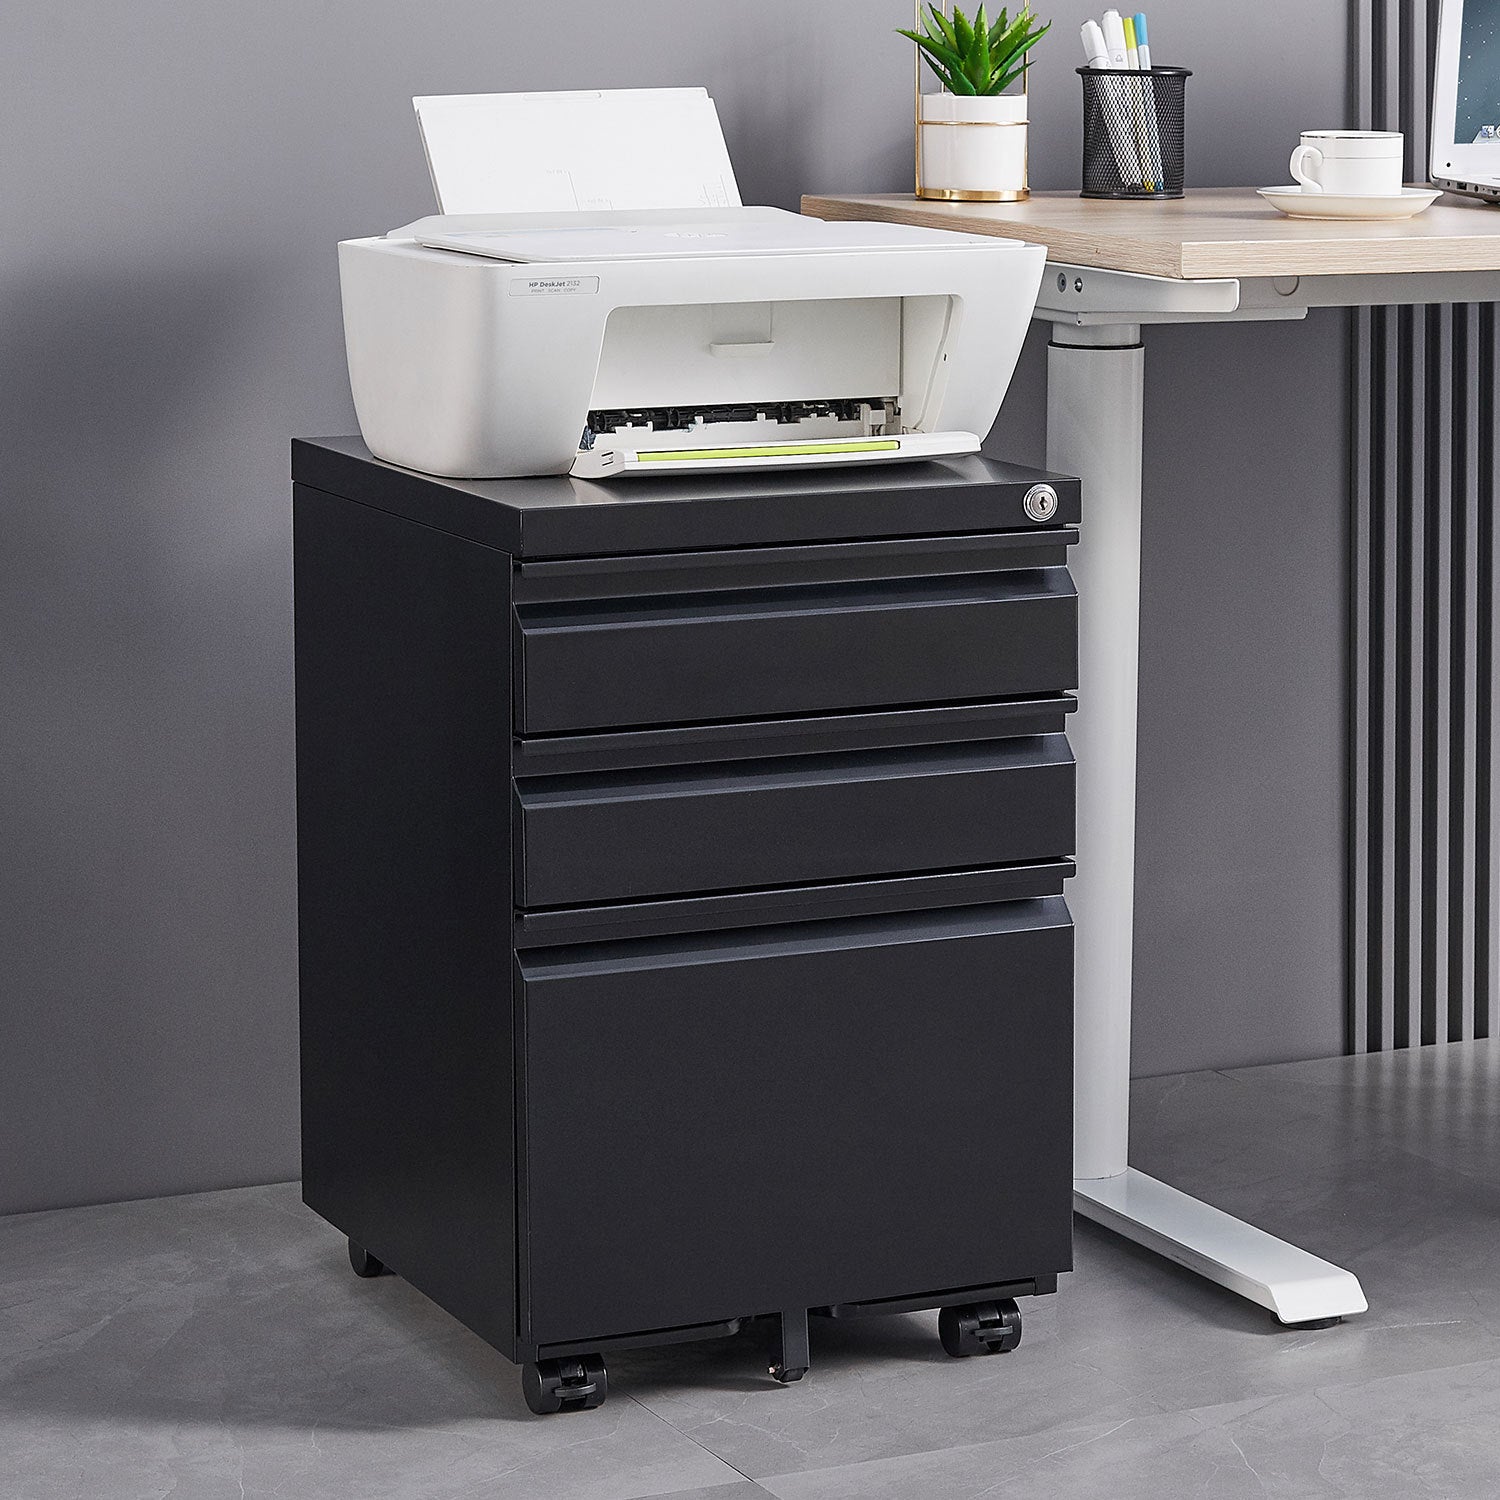 3 Drawer Mobile File Cabinet with Lock (Black)